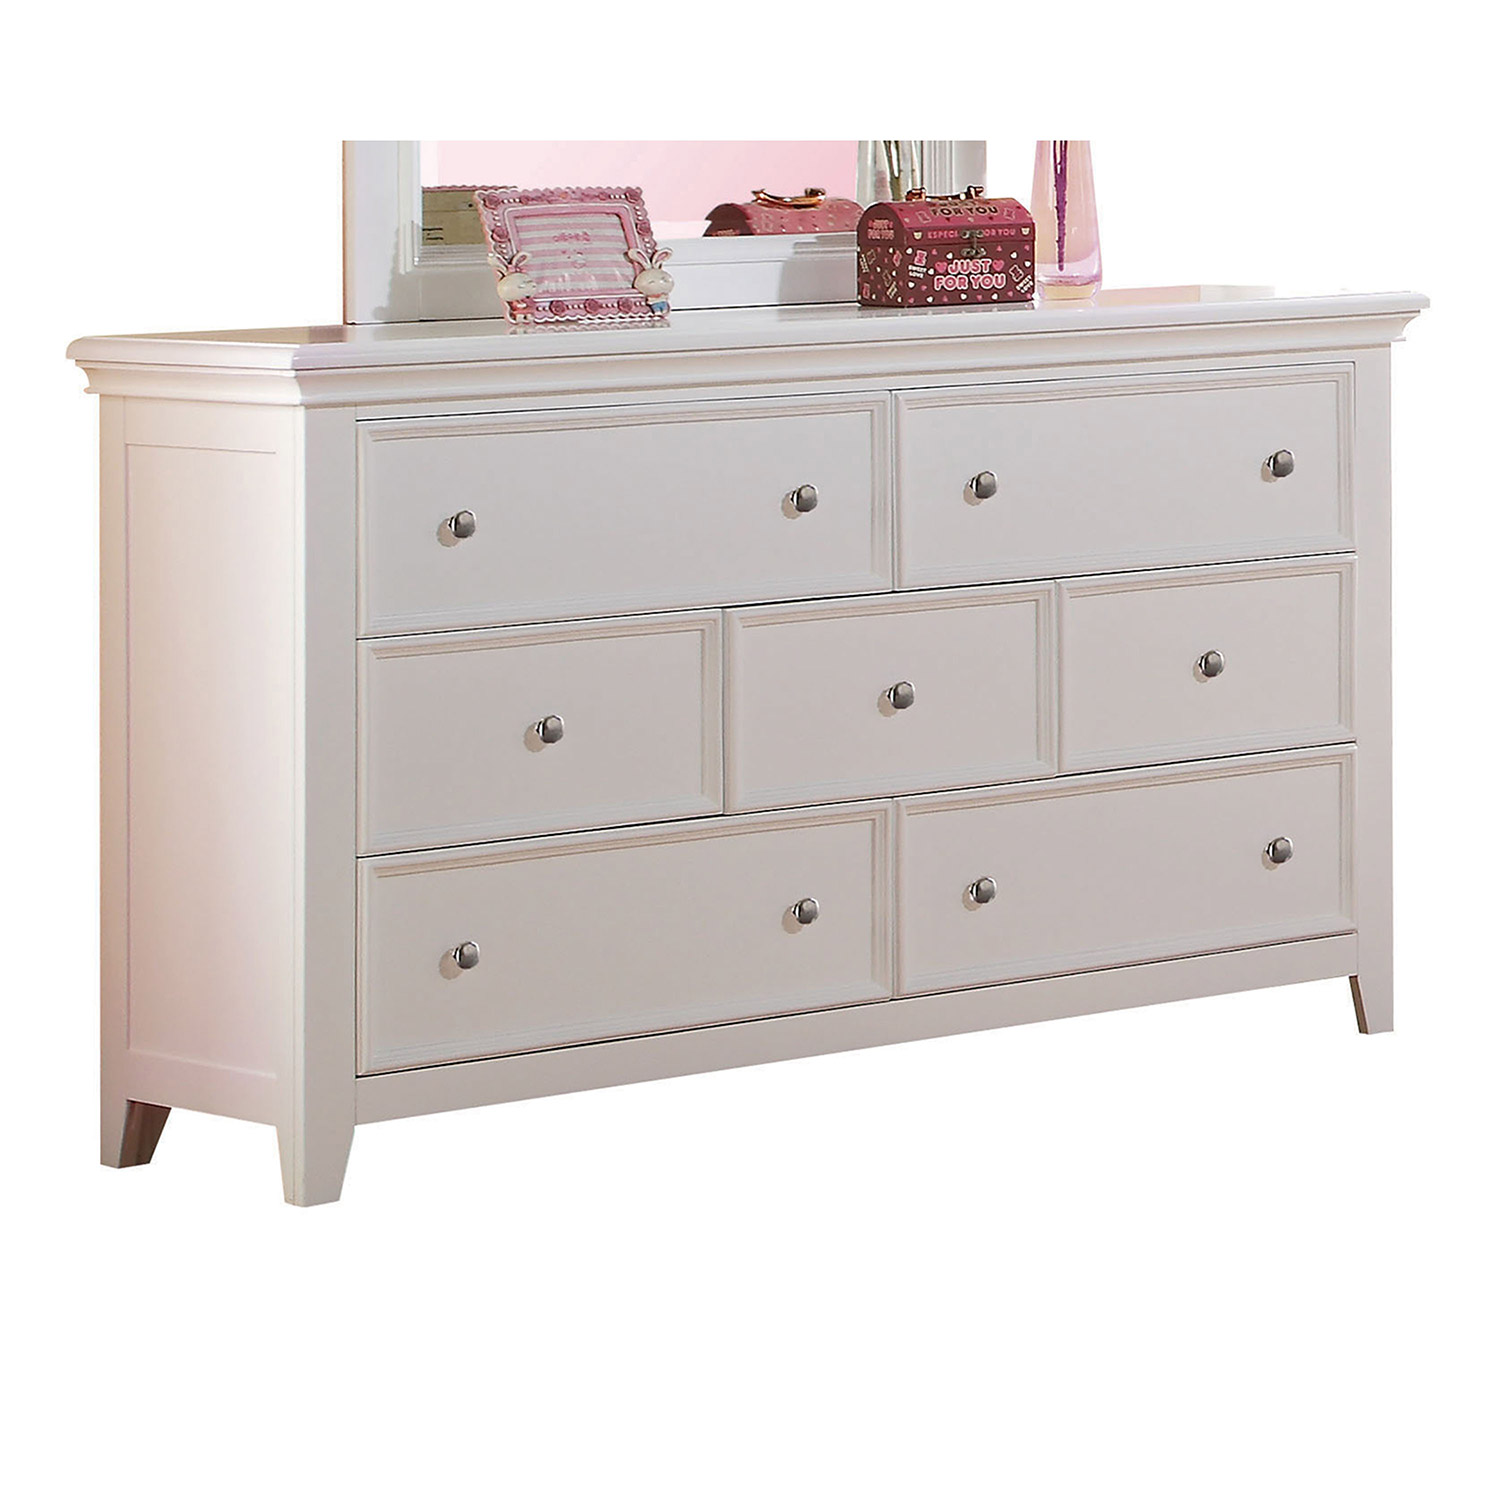 Acme Lacey Dresser - White